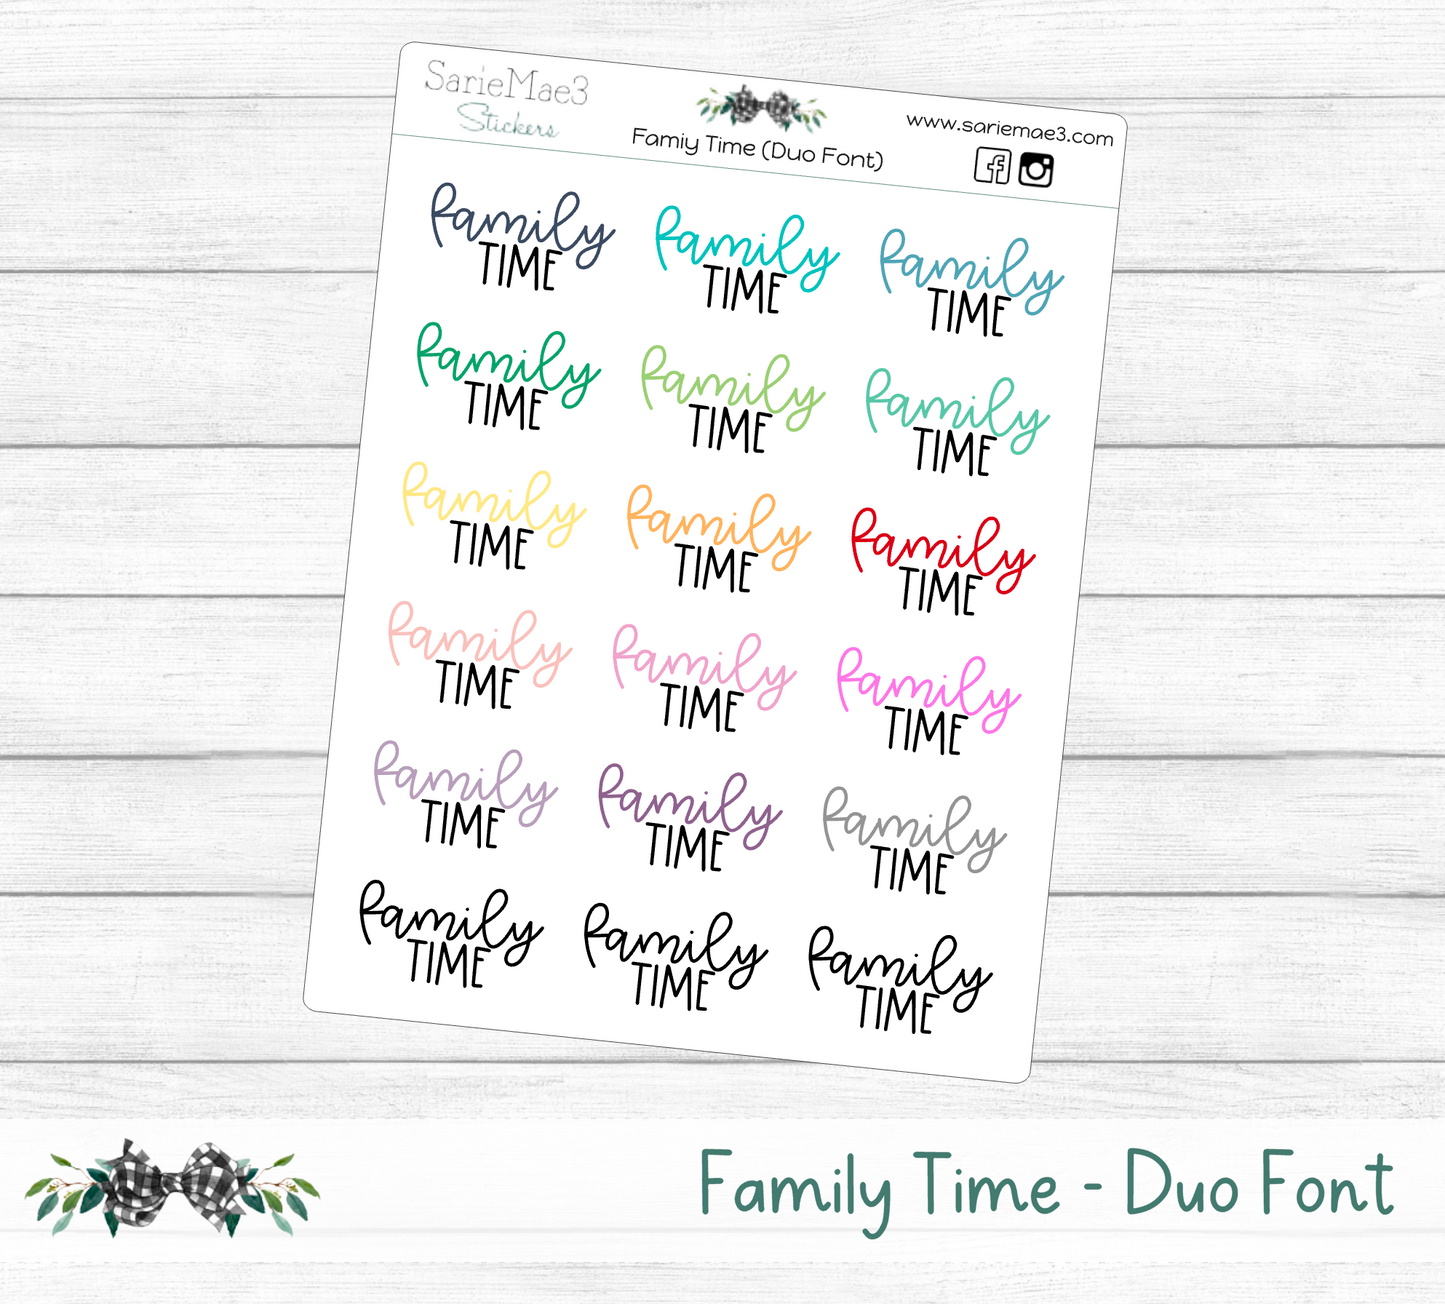 Family Time (Duo Font)